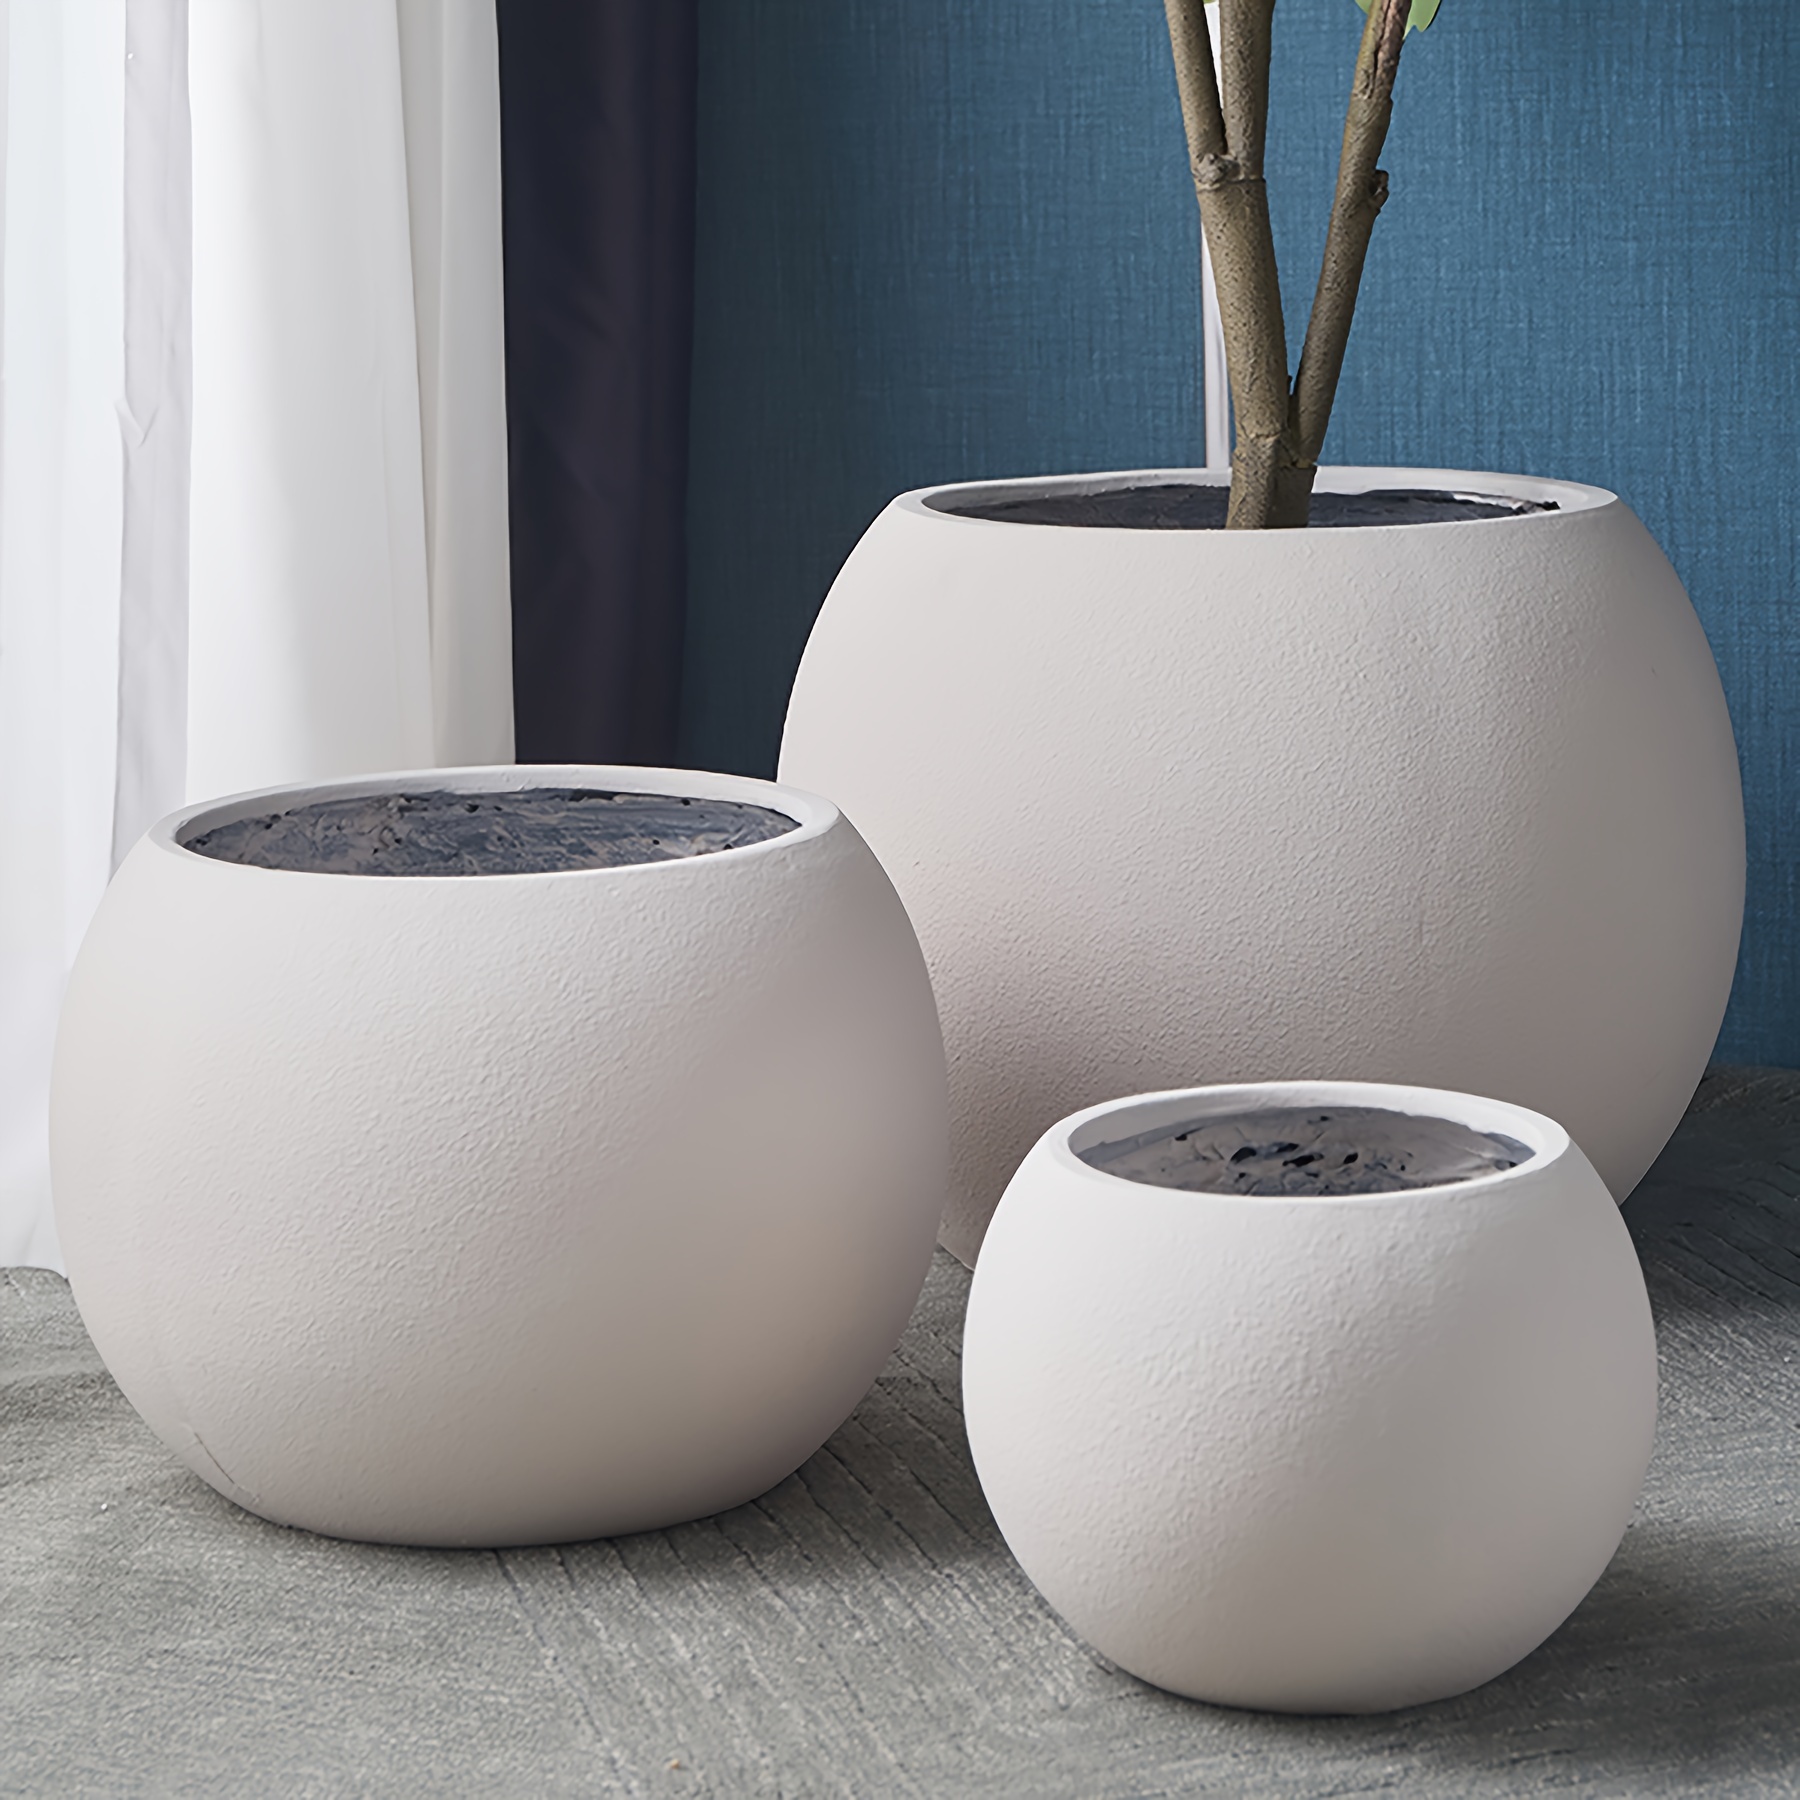 

Visible Large Ceramic Planter - Classic Round Ball Design With Drainage Hole, Powder-coated Finish For Indoor/outdoor Use